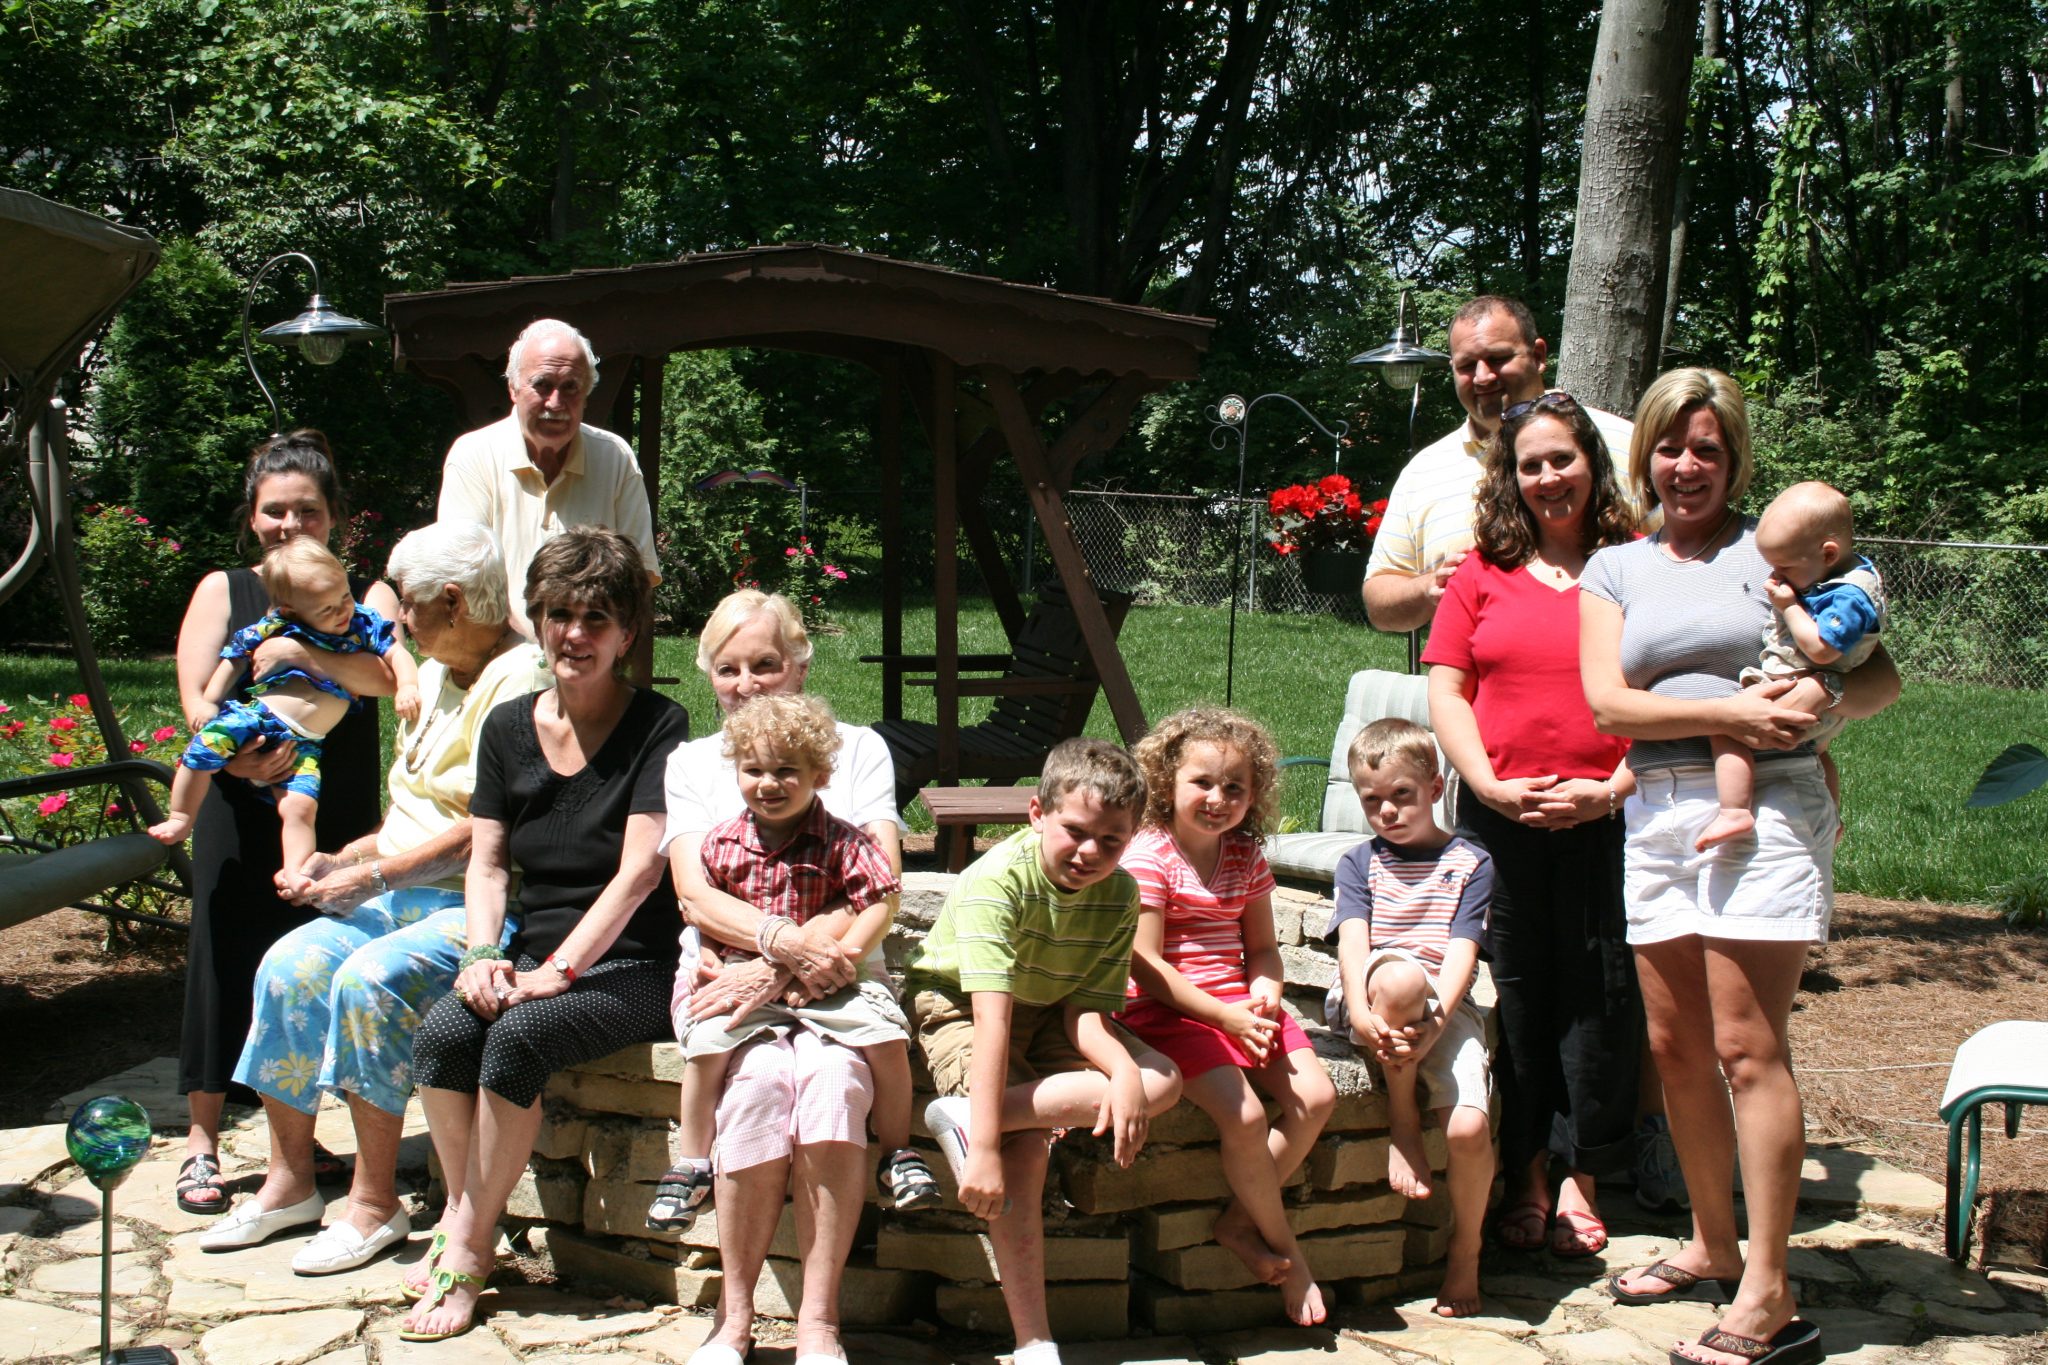 This is Aunt Pat with (from left to right) Alecia Simmons holding Mason Simmons, Pat, Bud, my mom, Aunt Mona holding Christian Simmons (David's son), Elliot Delape (Becky's son), Lexy Simmons (David's daughter), Hunter Delape (Becky's son), David Simmons, Shelly Simmons (David's wife), Becky Simmons holding Sean Simmons (David's son) in June of 2008.